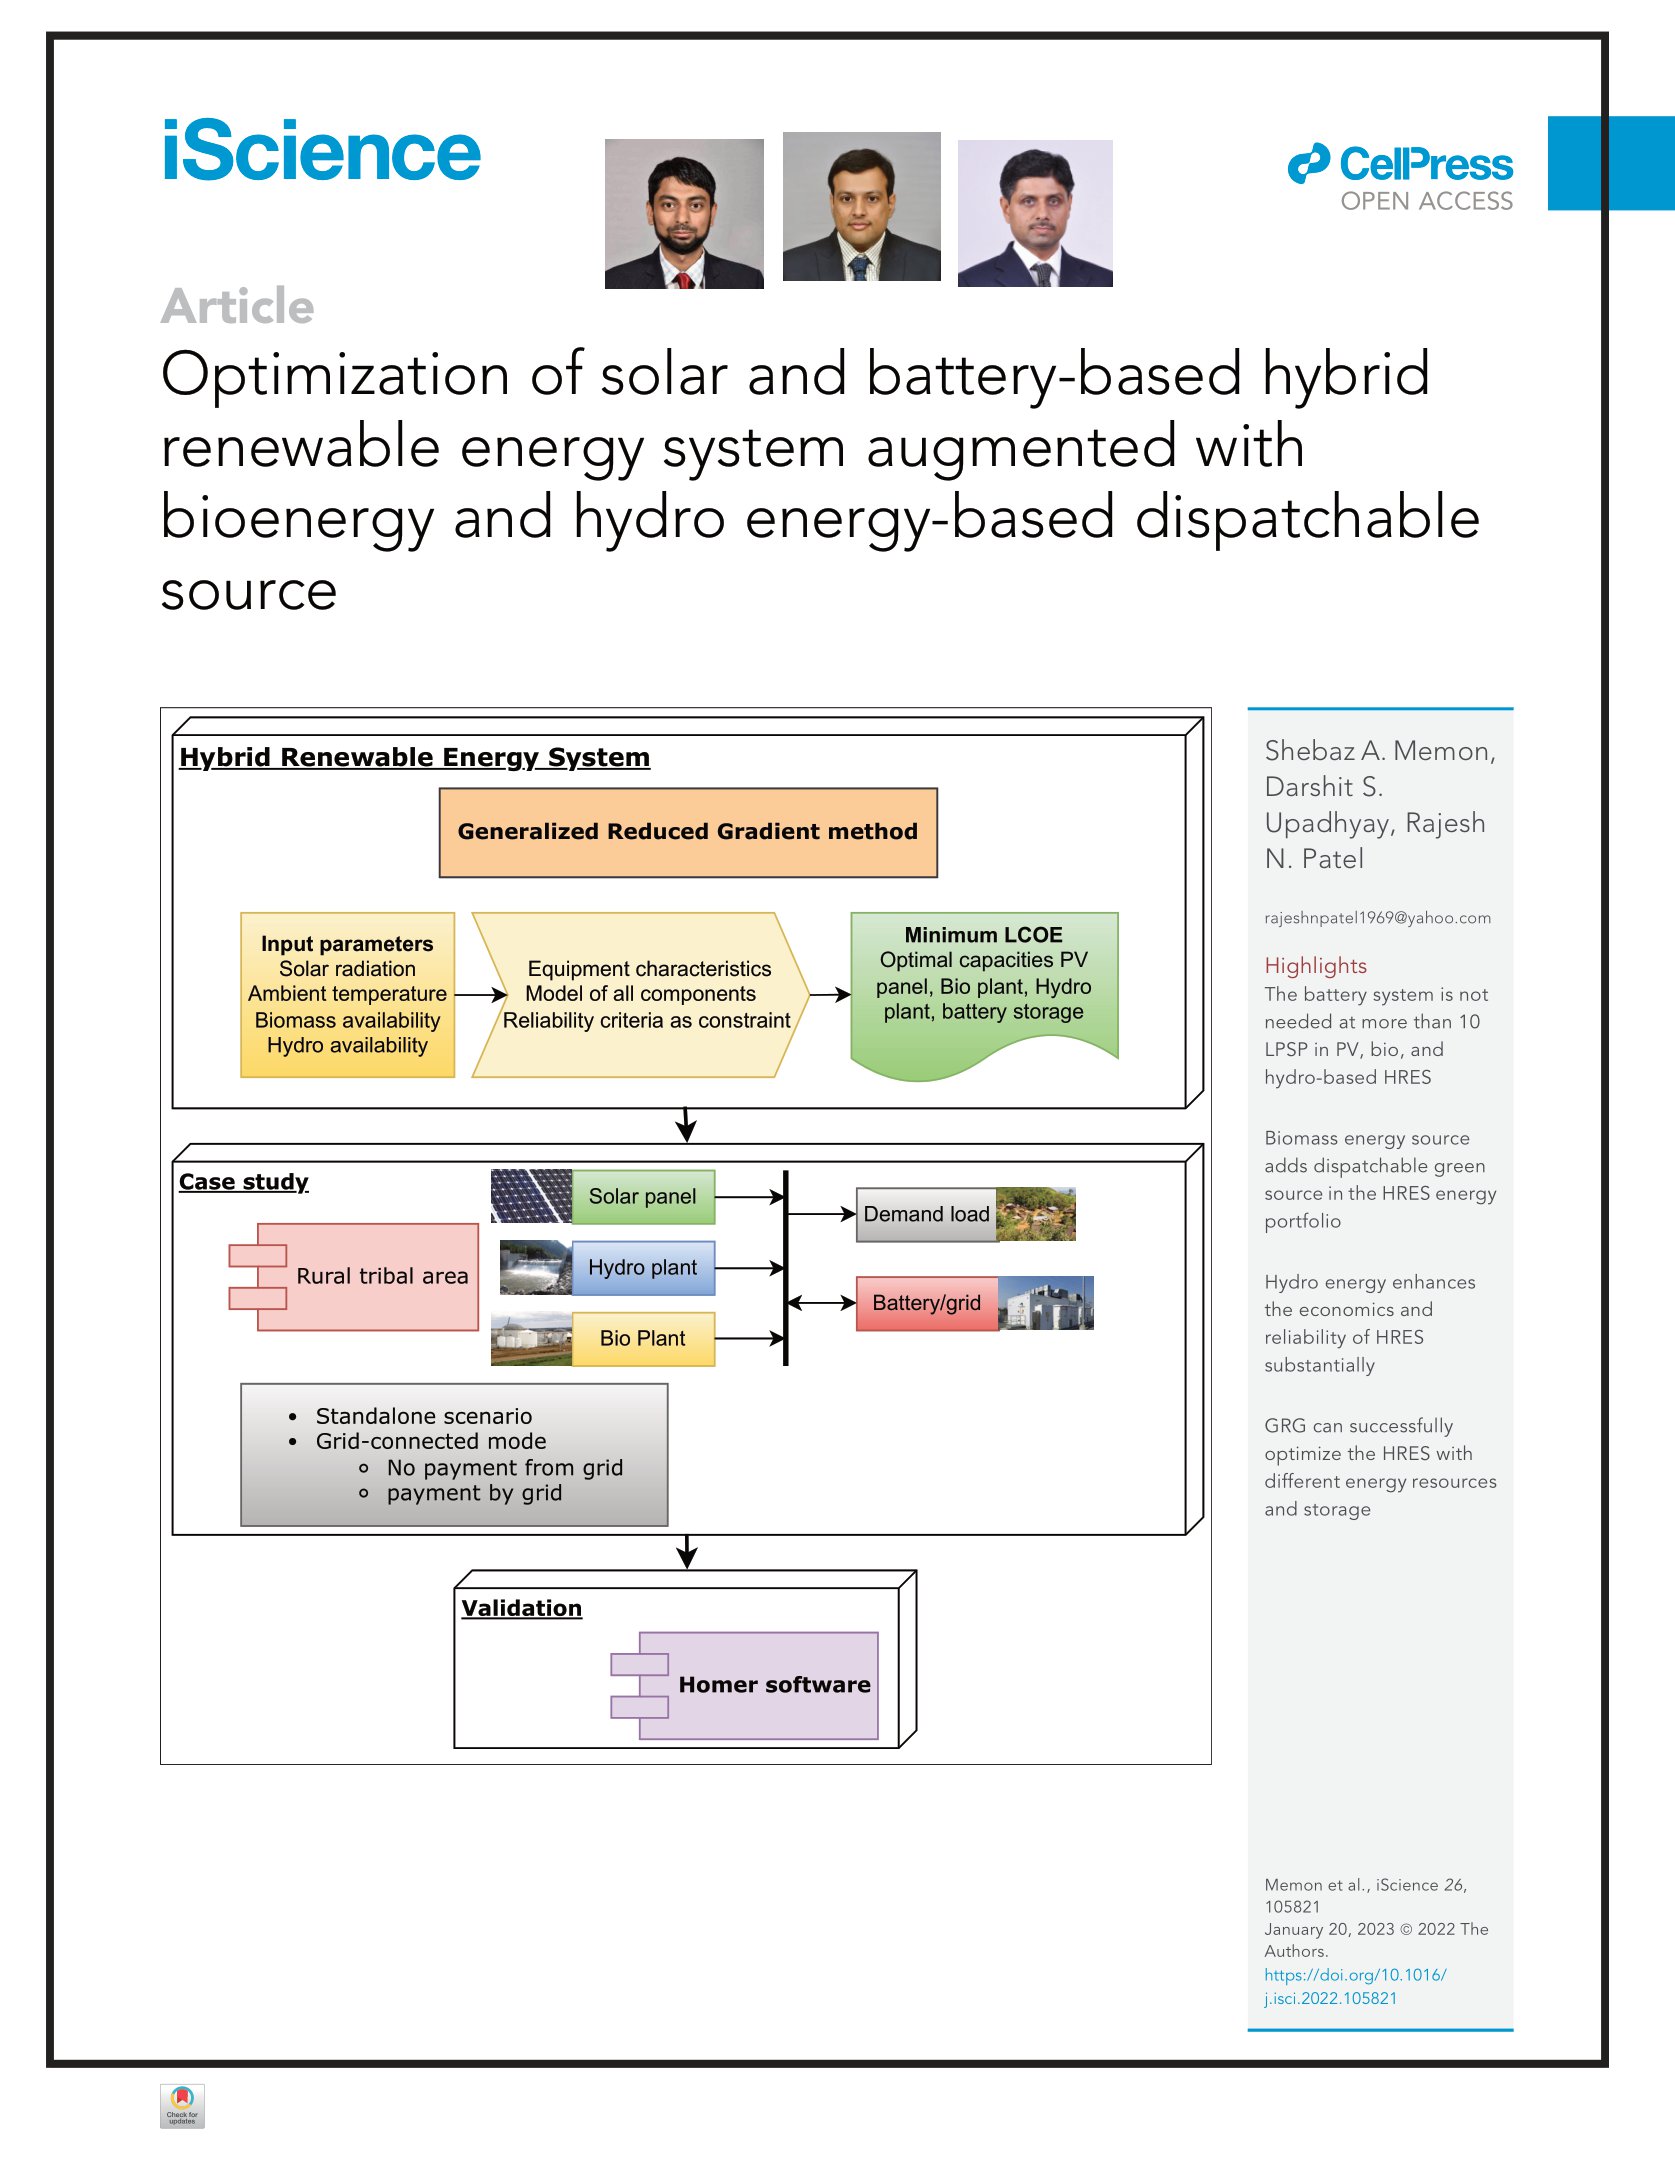 Optimization of solar and battery-based hybrid renewable energy system augmented with bioenergy and hydro energy-based dispatchable source